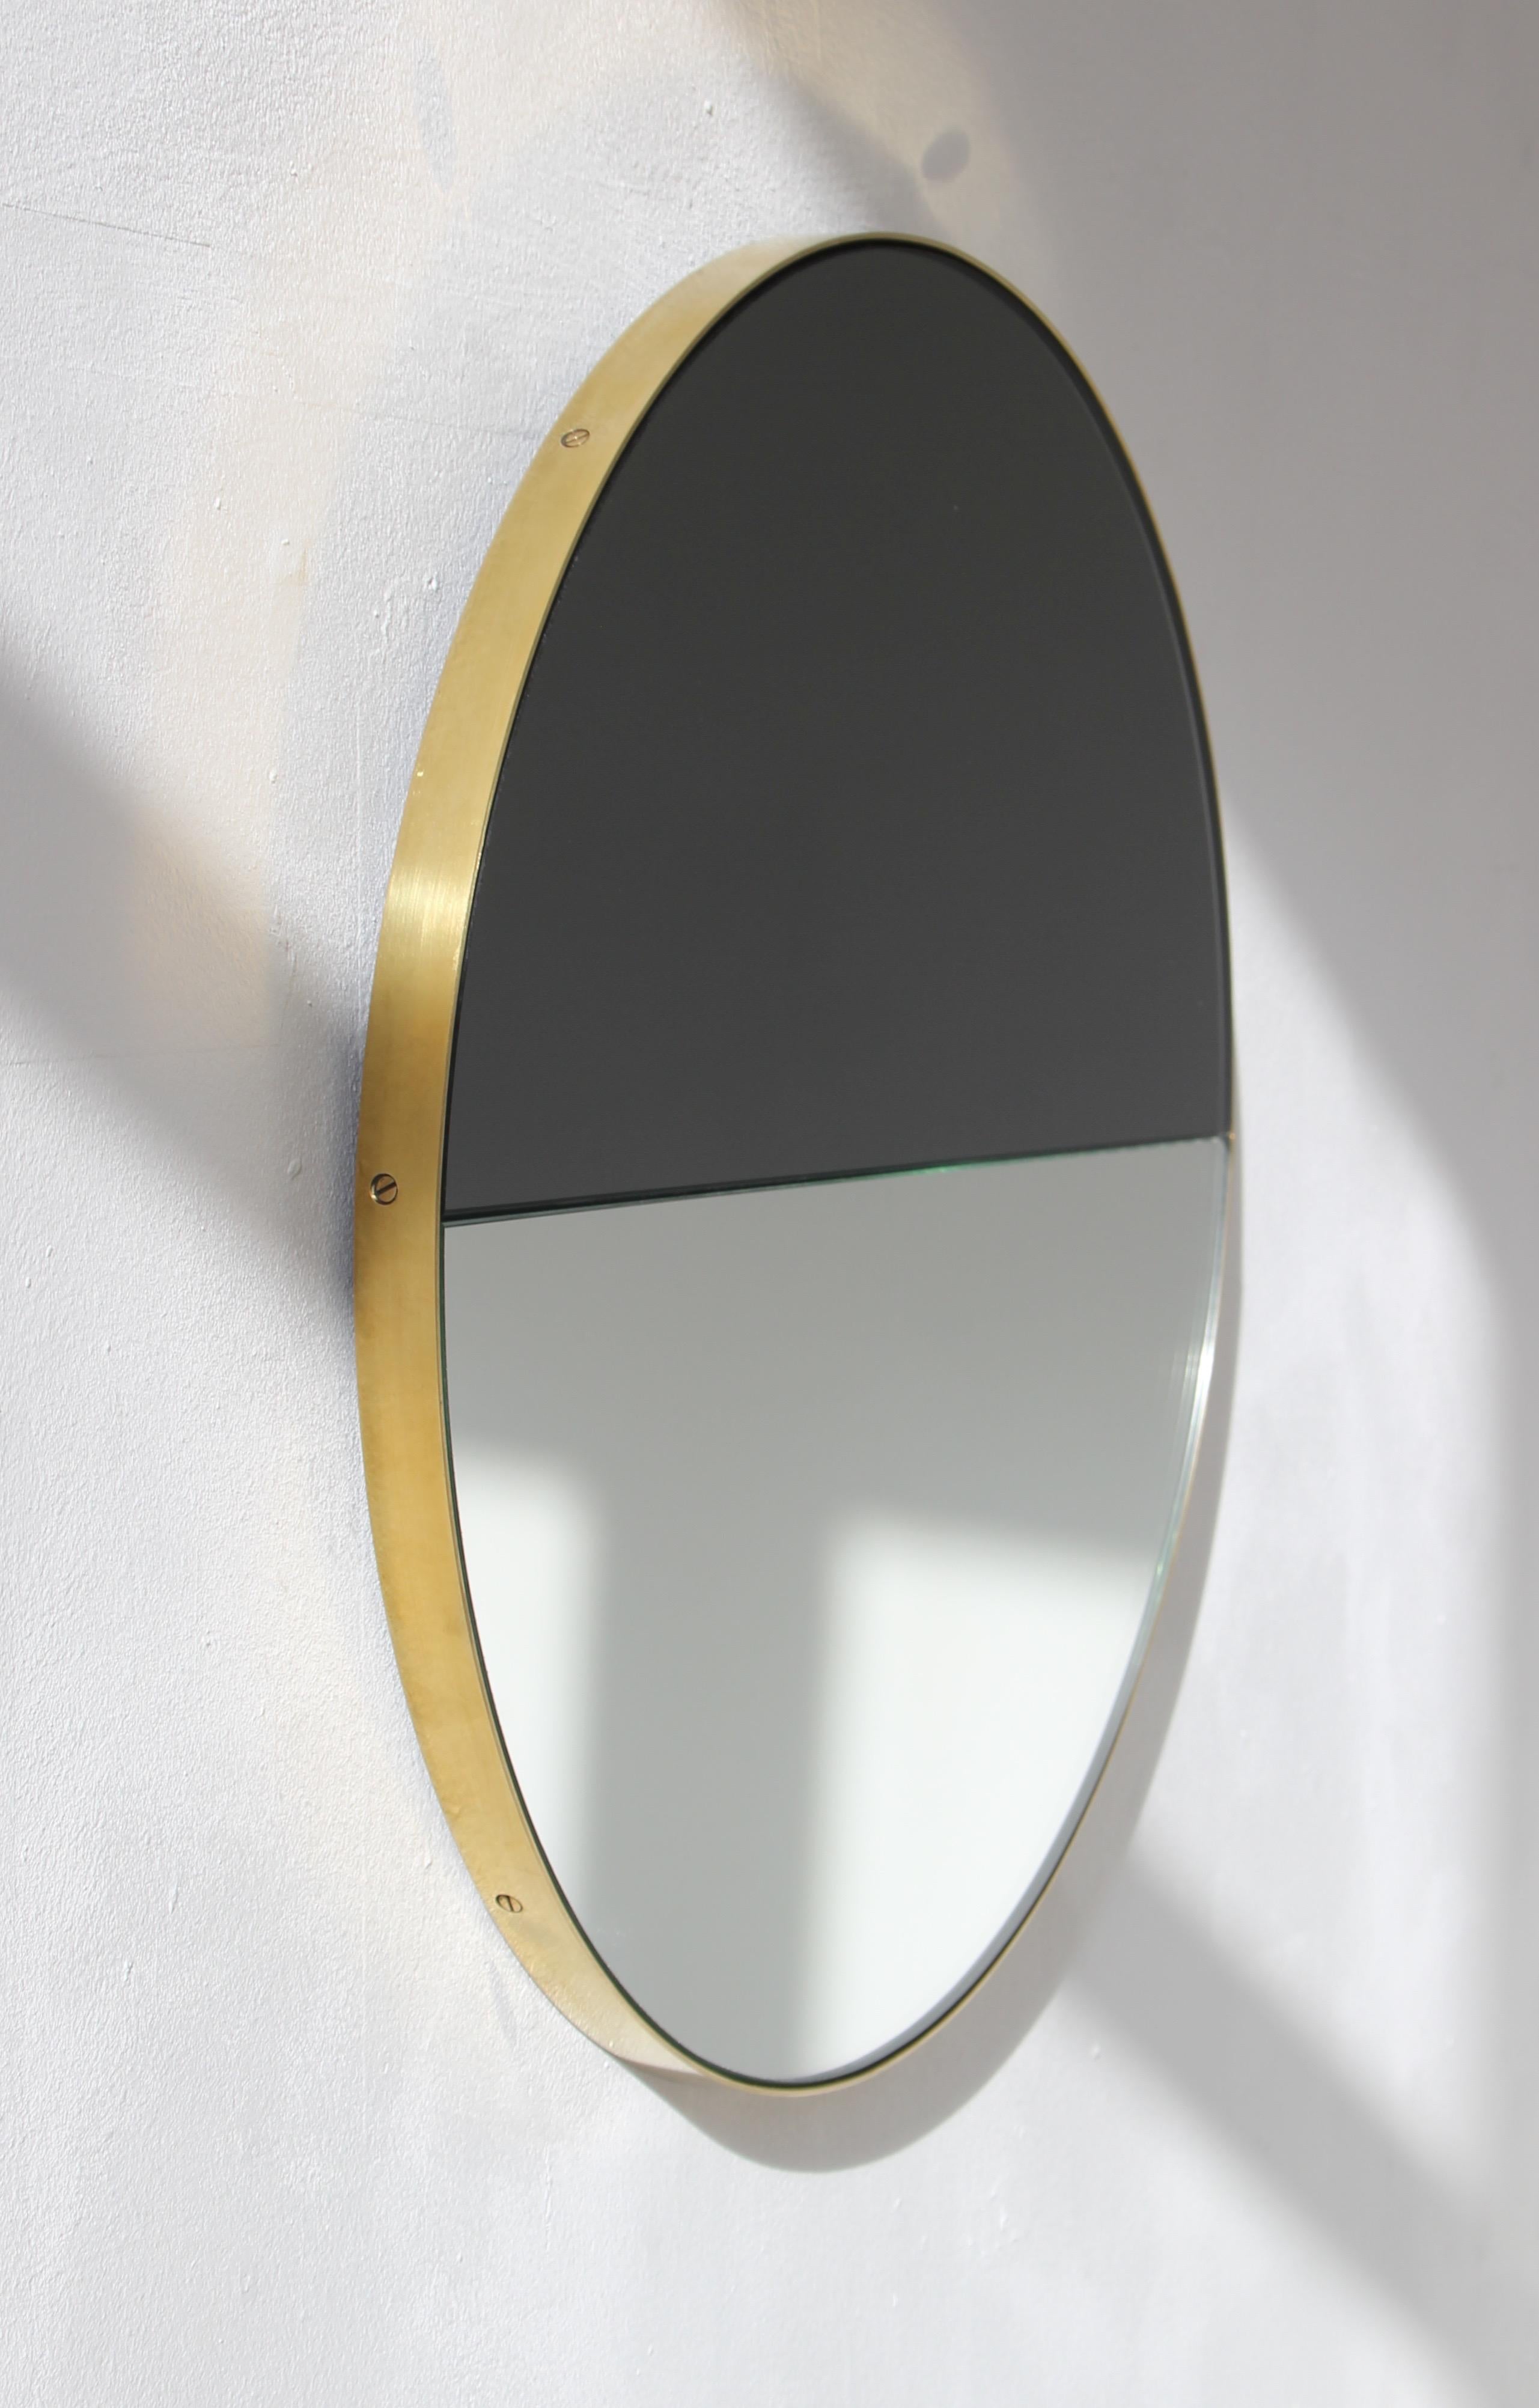 British Orbis Dualis Mixed Tint Contemporary Round Mirror with Brass Frame, Regular For Sale